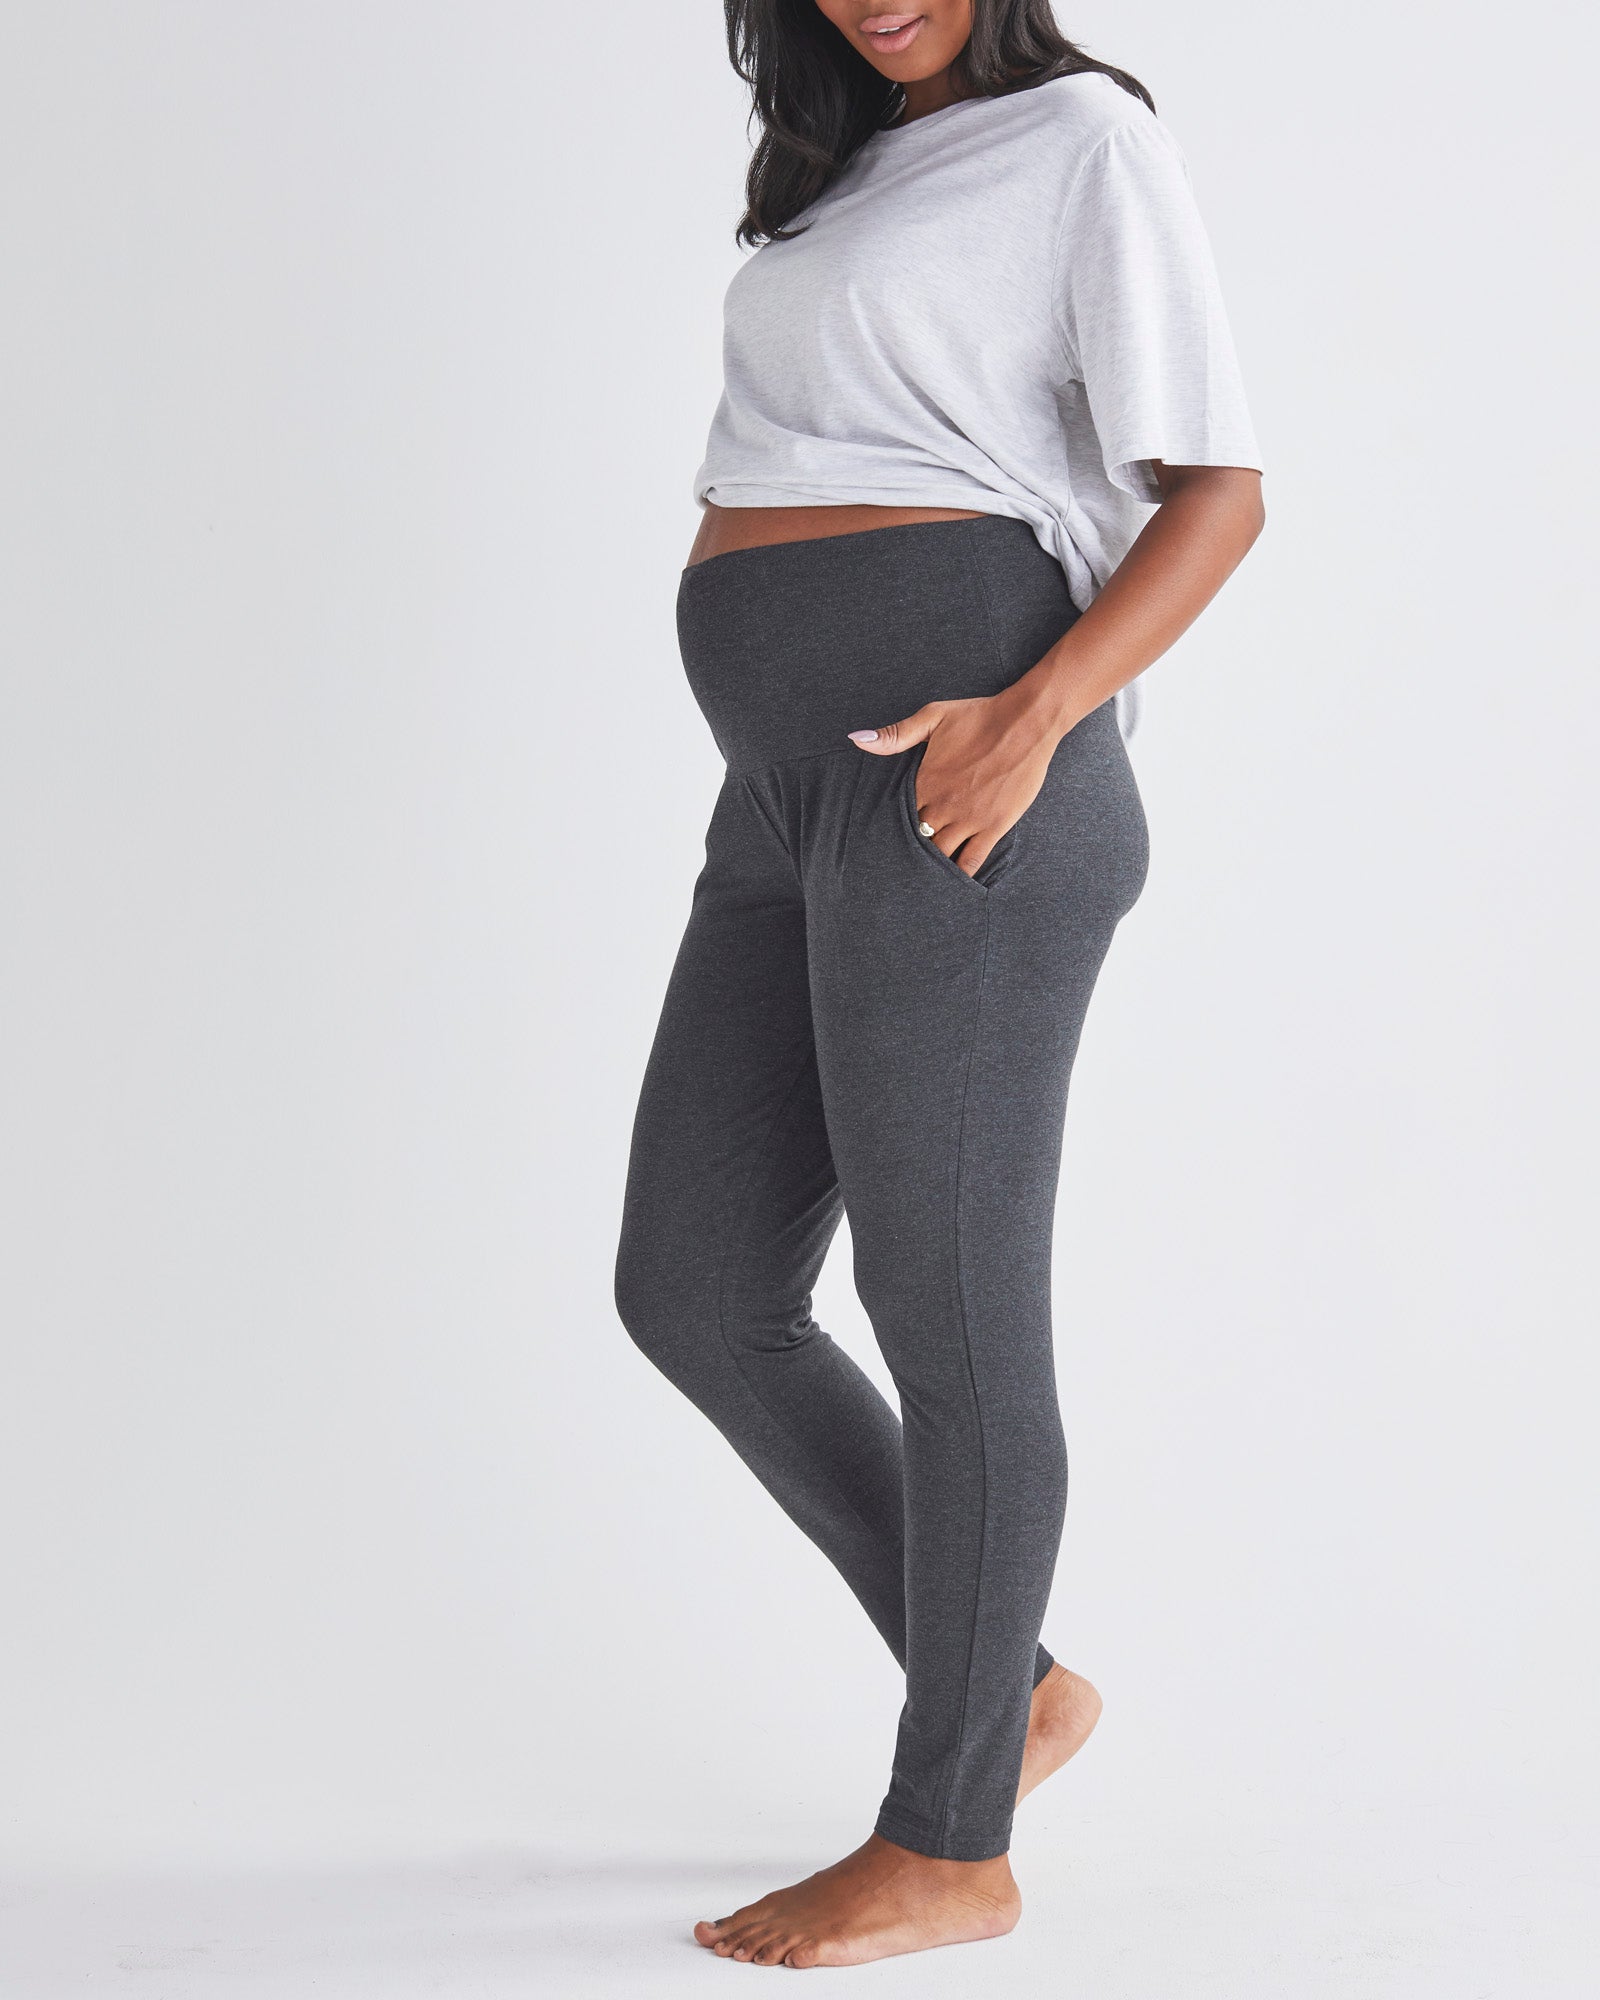 Maternity Pants Comfortable Stretch Over-bump Women Pregnancy